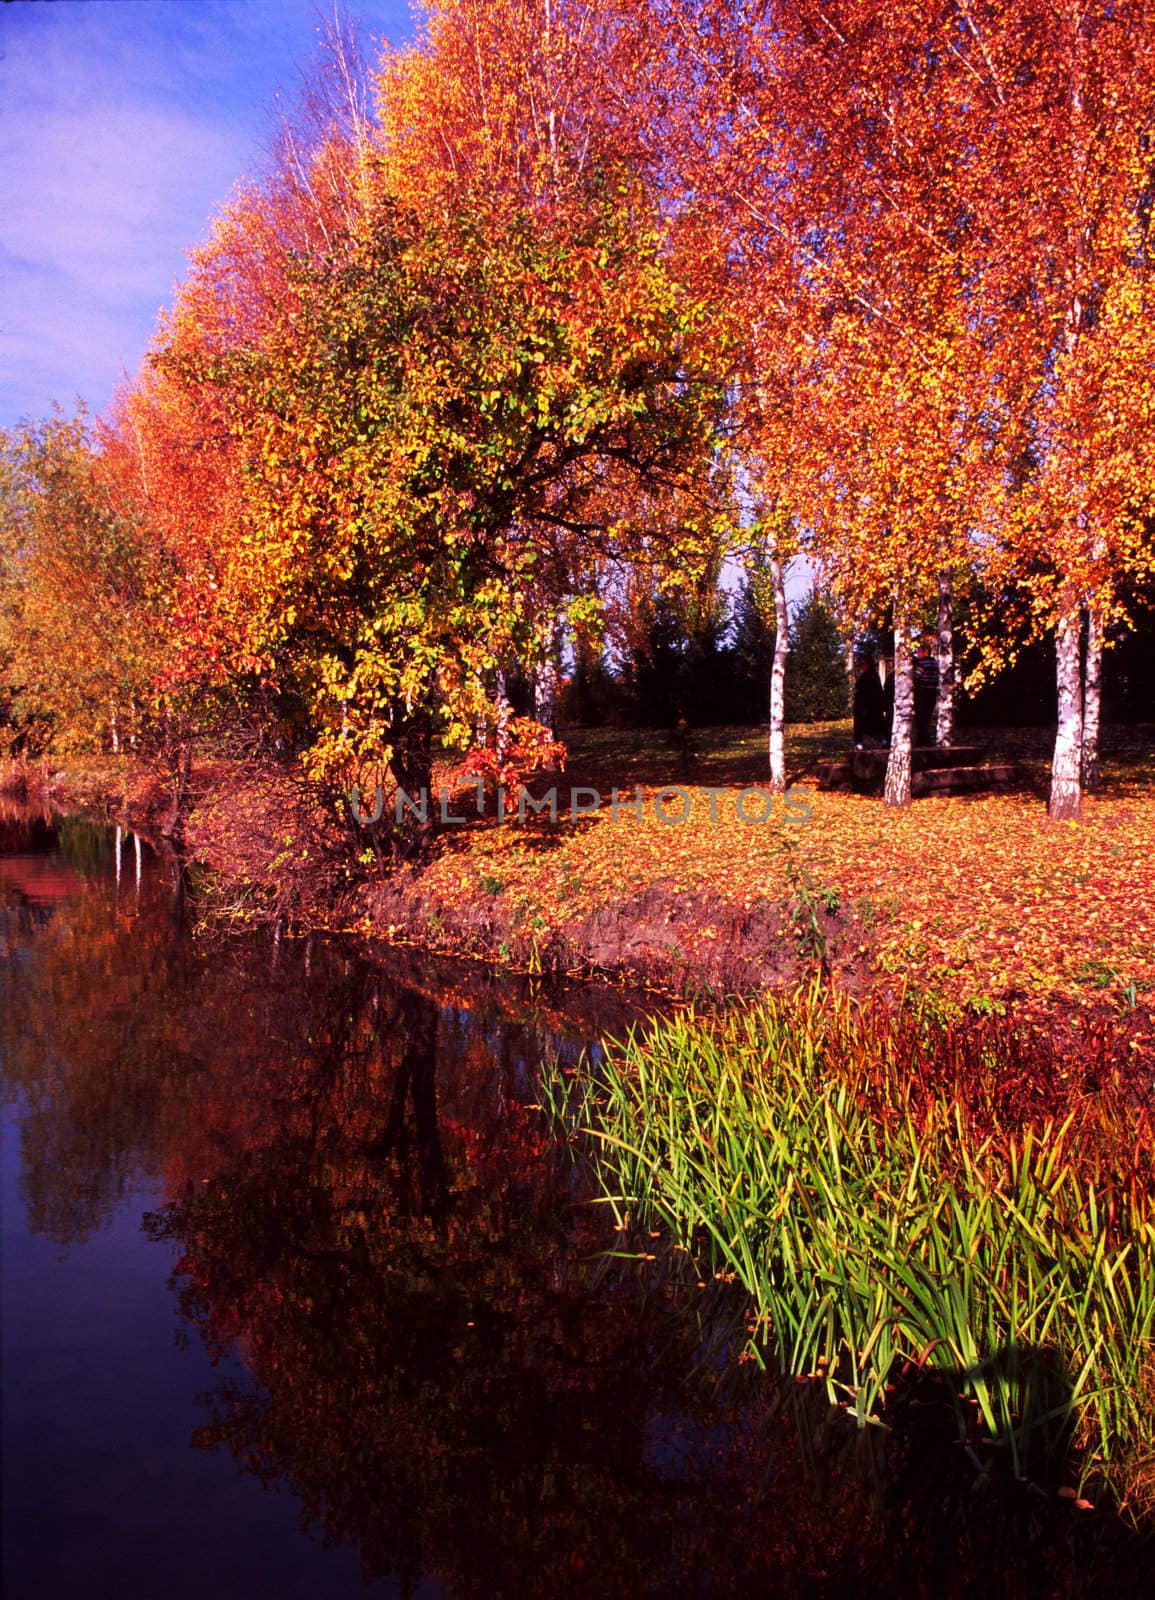 Bank of the river in autumn. Magic of nature colors/